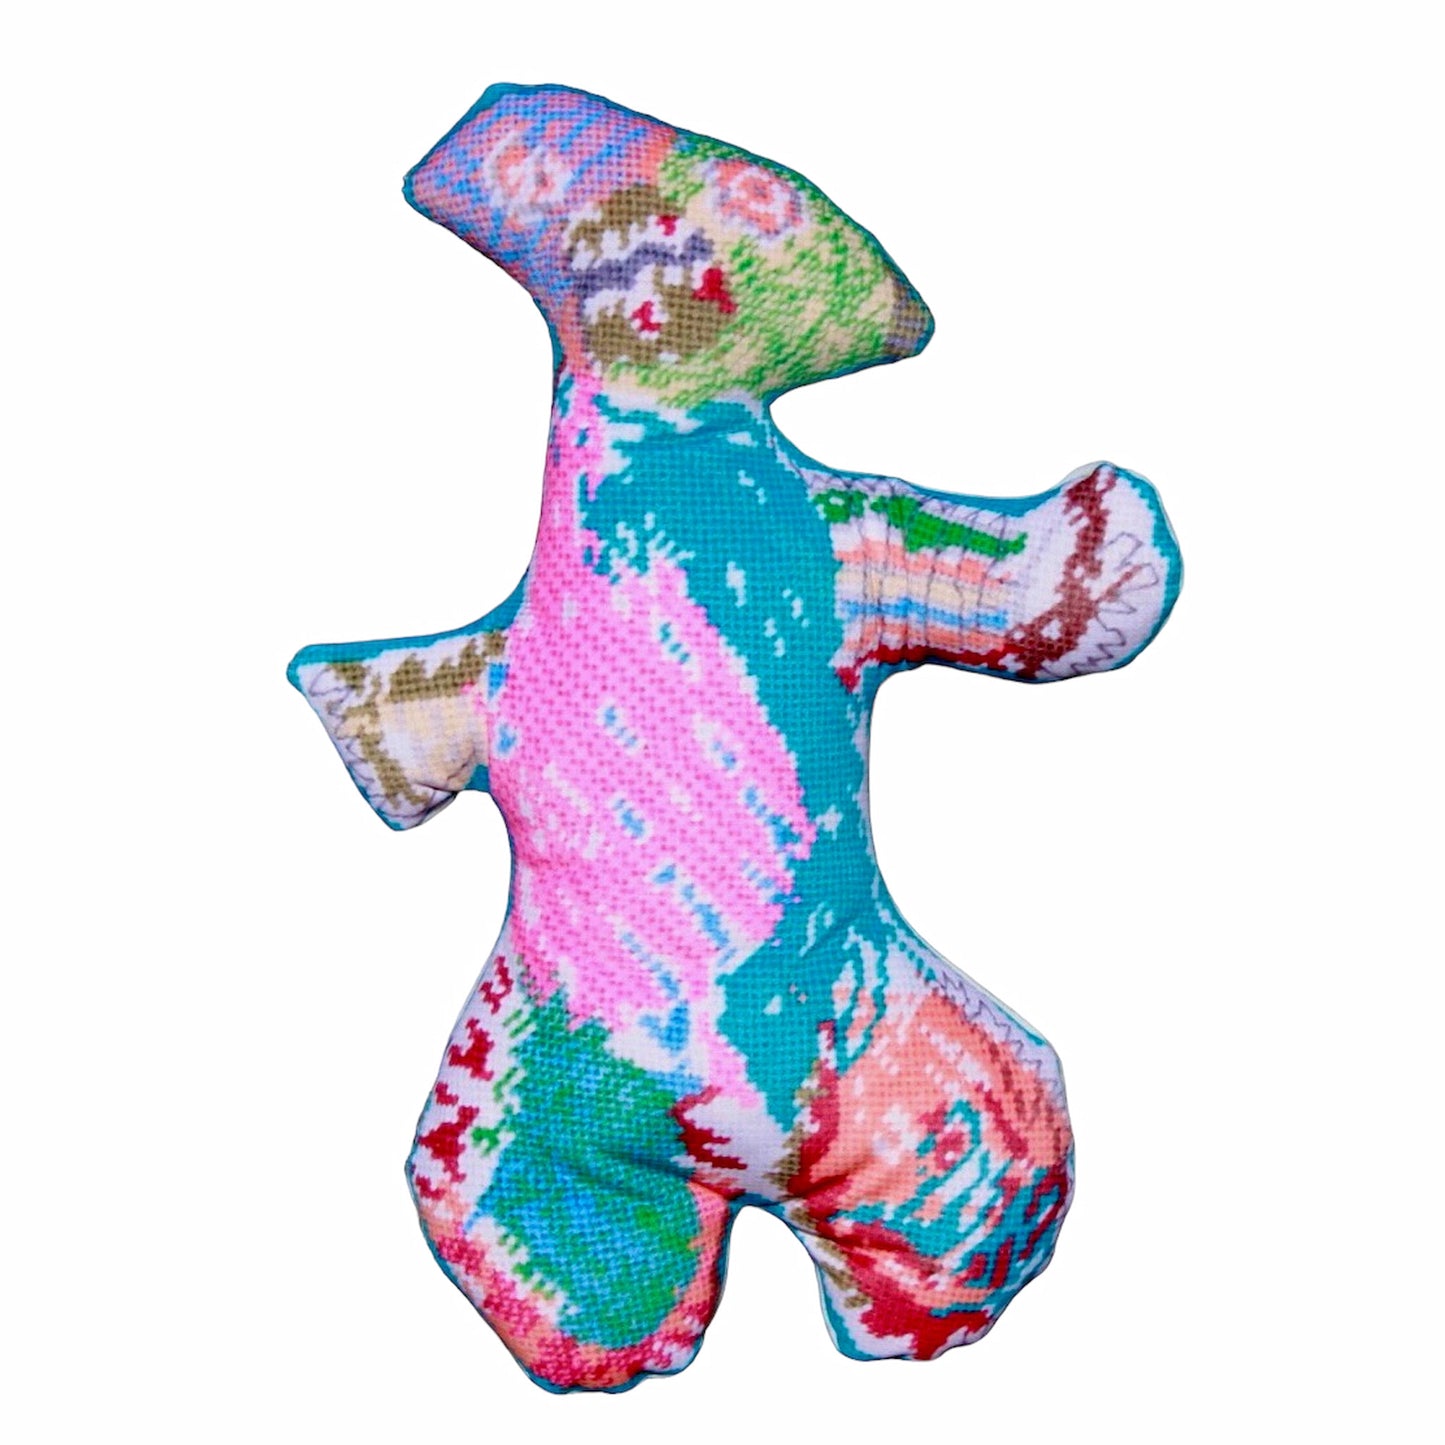 colorful, silly sculpted soft plush monster